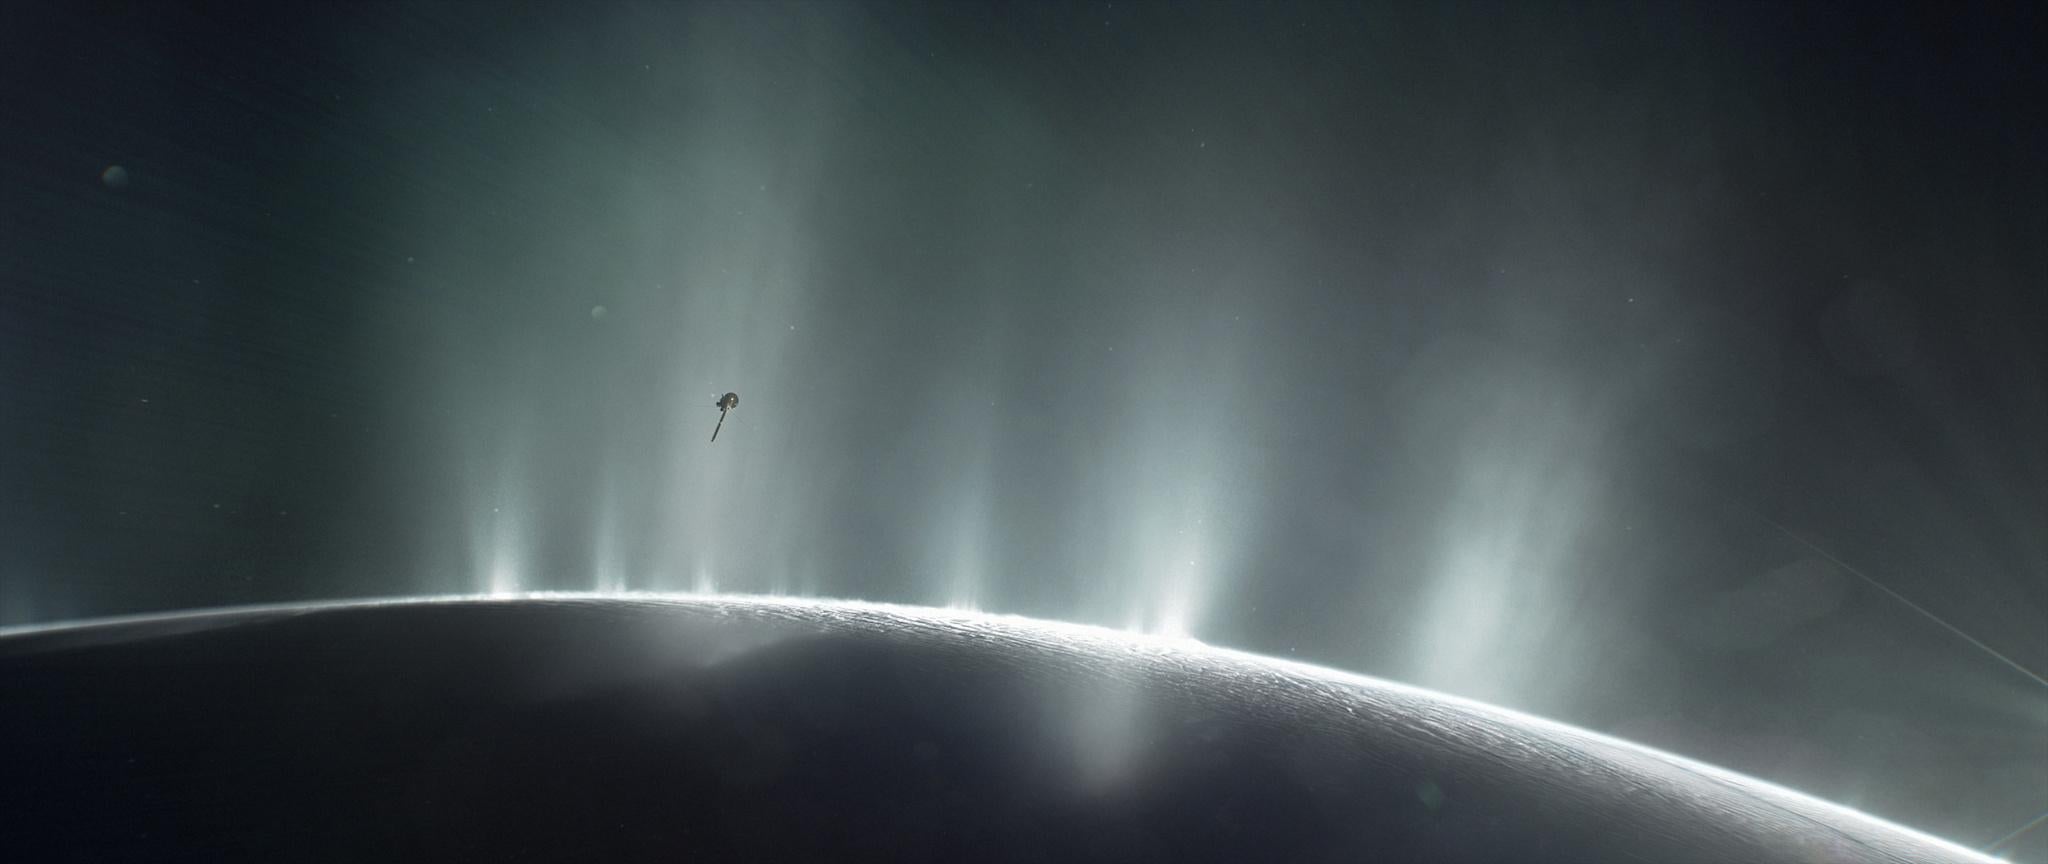 NASA's Cassini spacecraft is shown diving through the plume of Saturn's moon Enceladus, in 2015, in this photo illustration